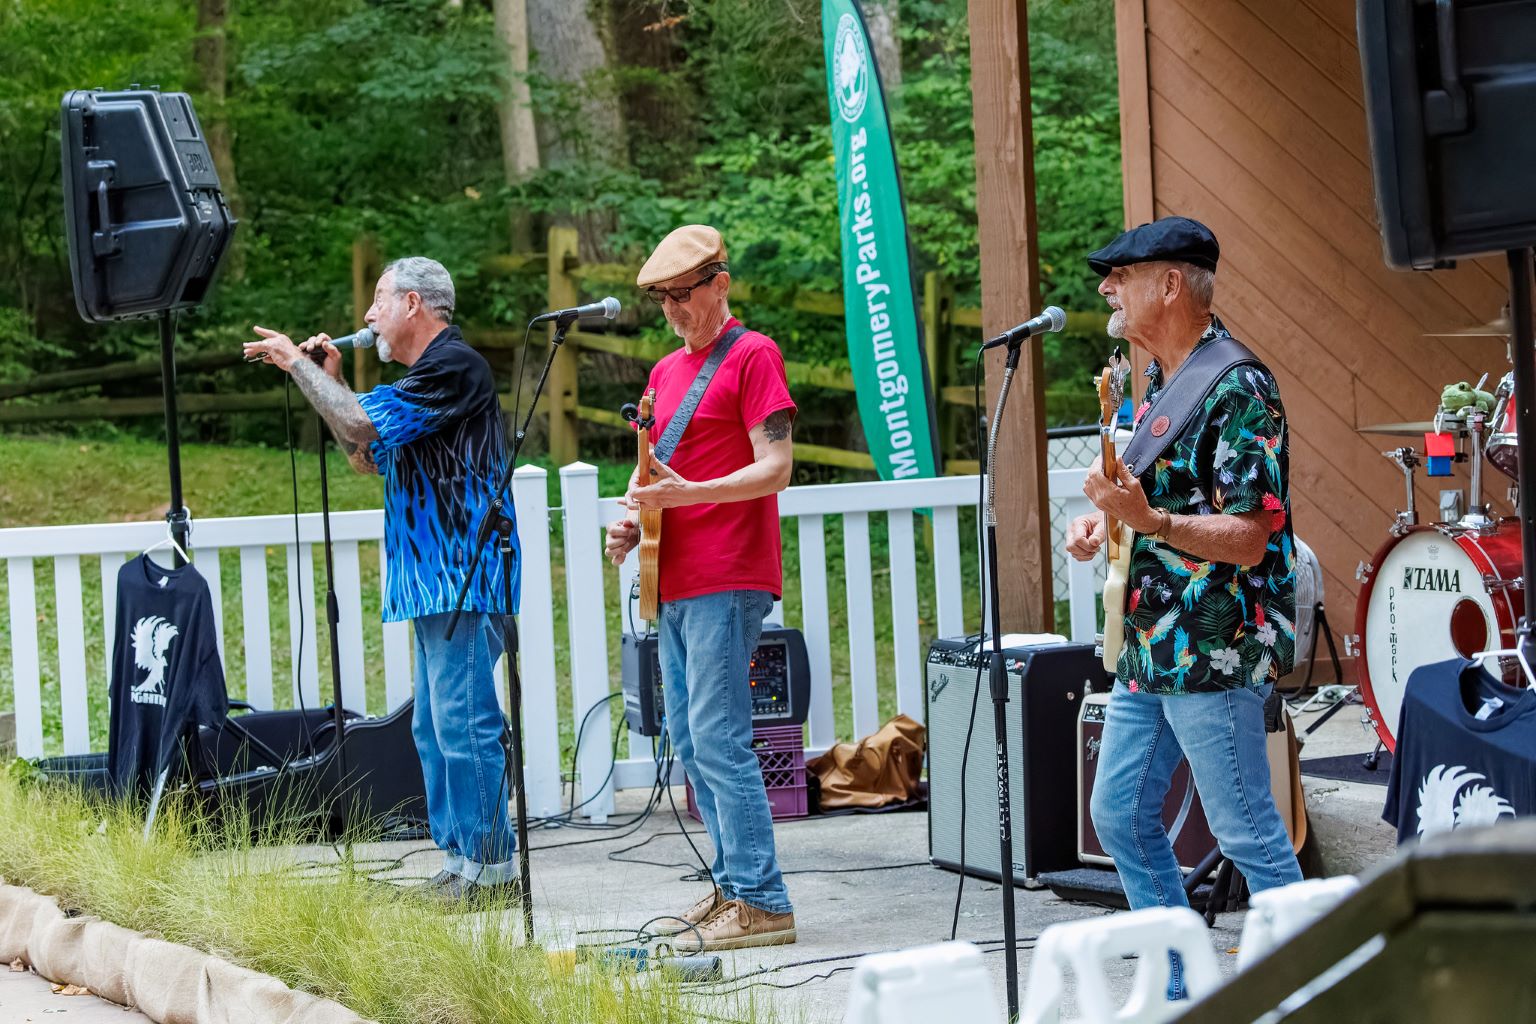 parks summer concert series july 11th at black hill regional park , playing the nighthawks